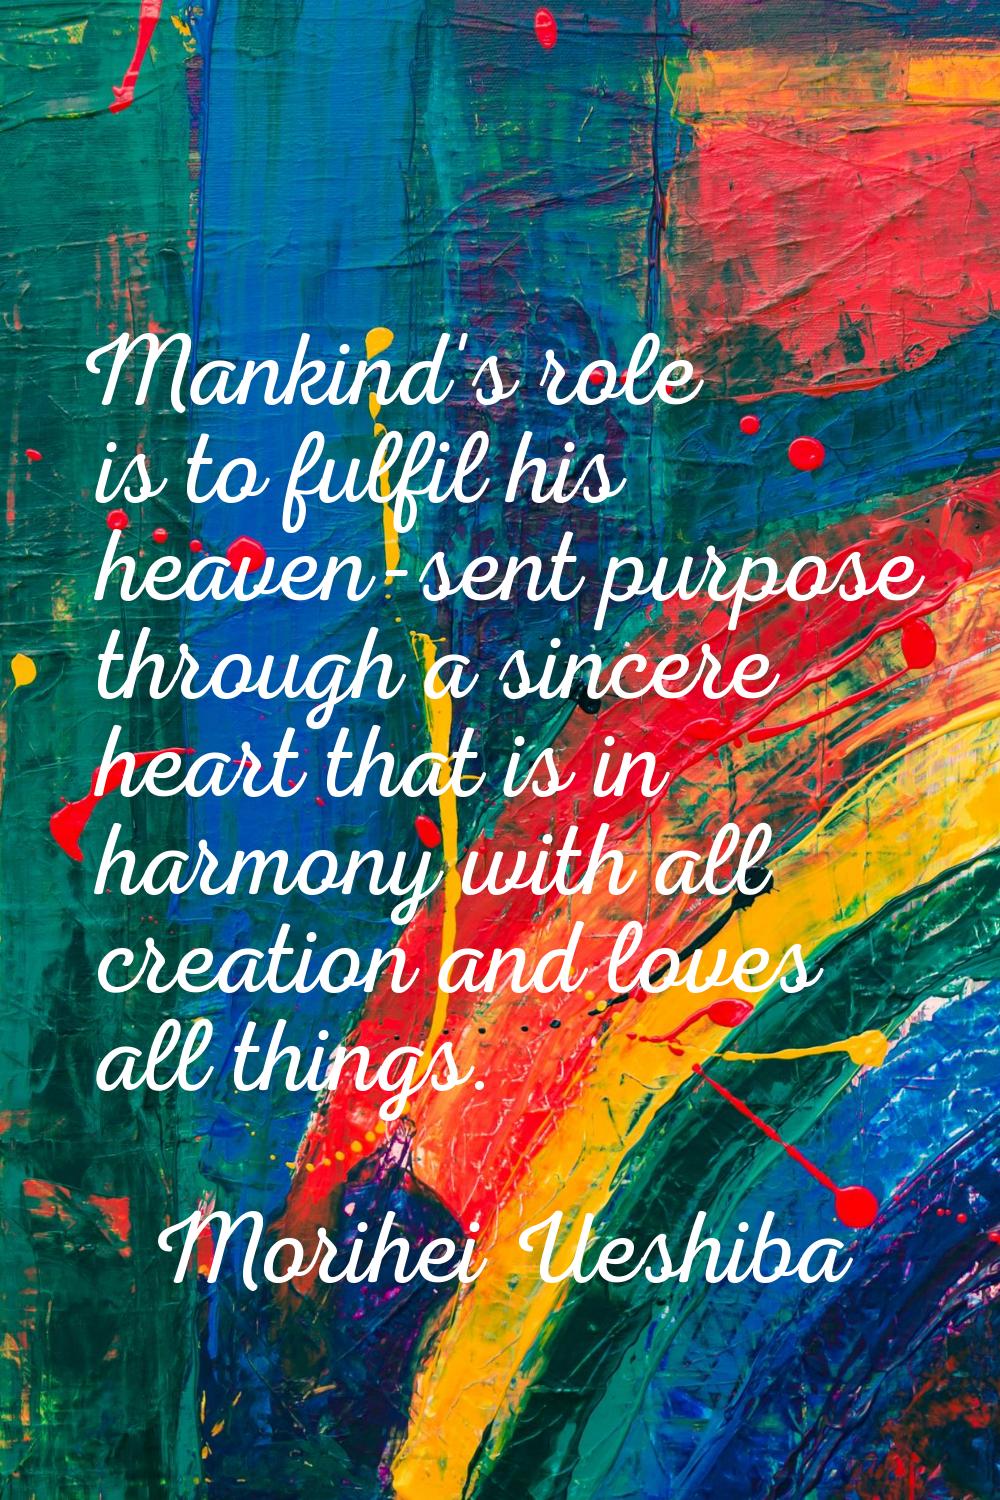 Mankind's role is to fulfil his heaven-sent purpose through a sincere heart that is in harmony with